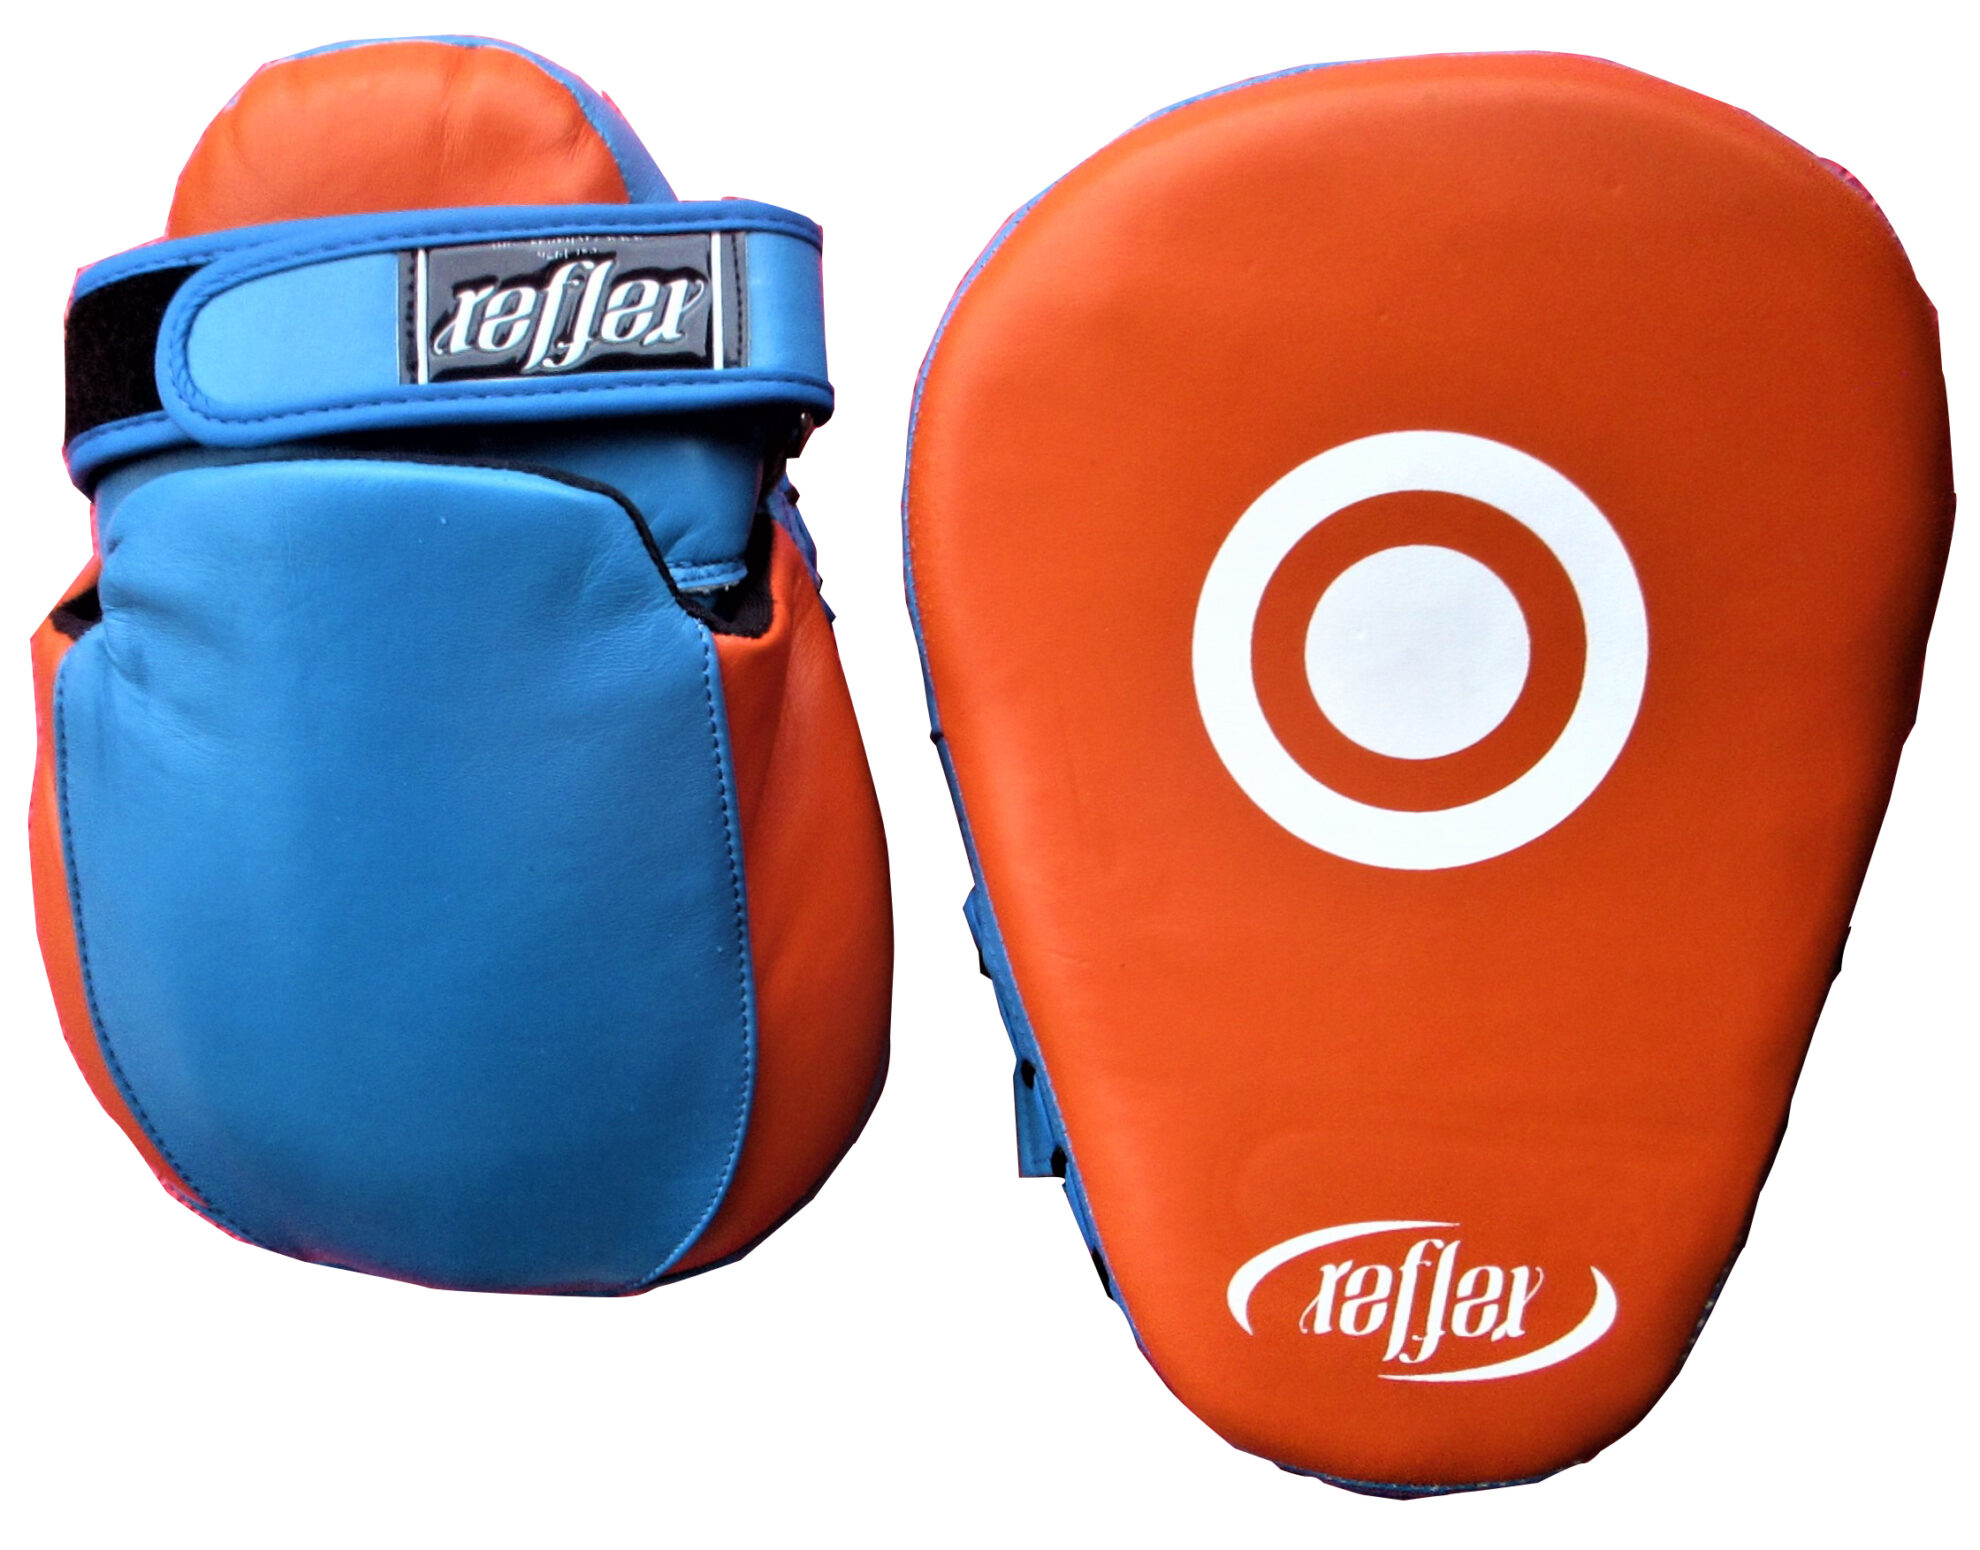 leather focus mitt with power dome for extra comfort and ergonomic shaping velcro closure unique feautre padded back for face protection